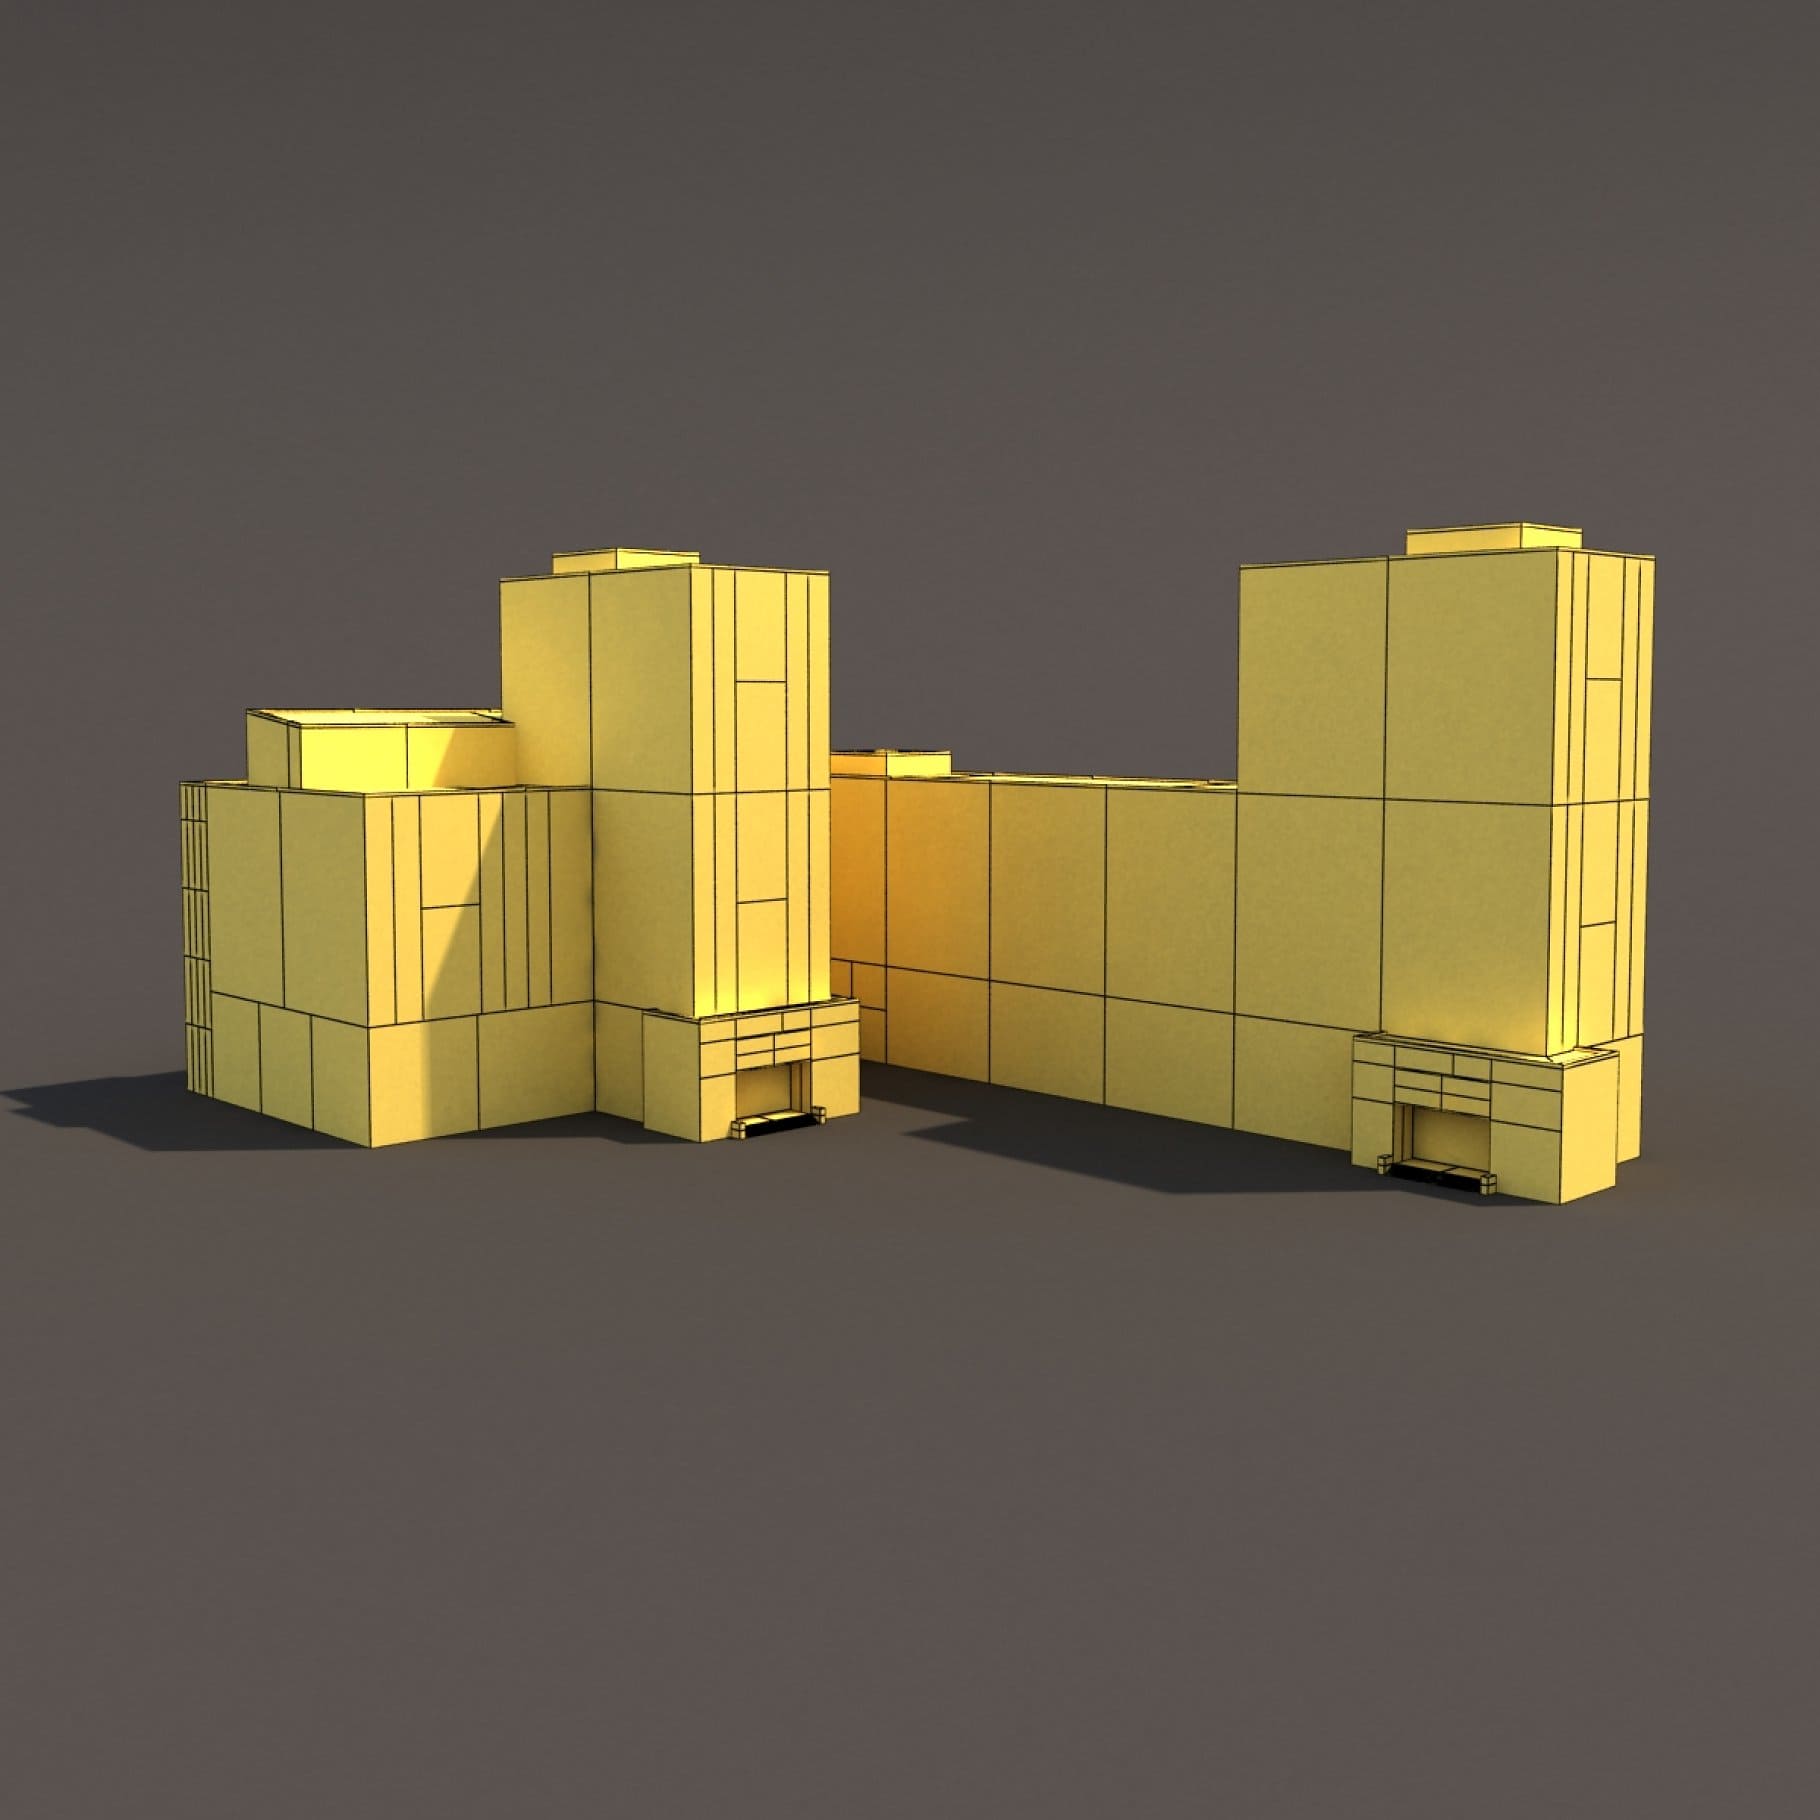 Office building with two exits in the form of a yellow 3D model.